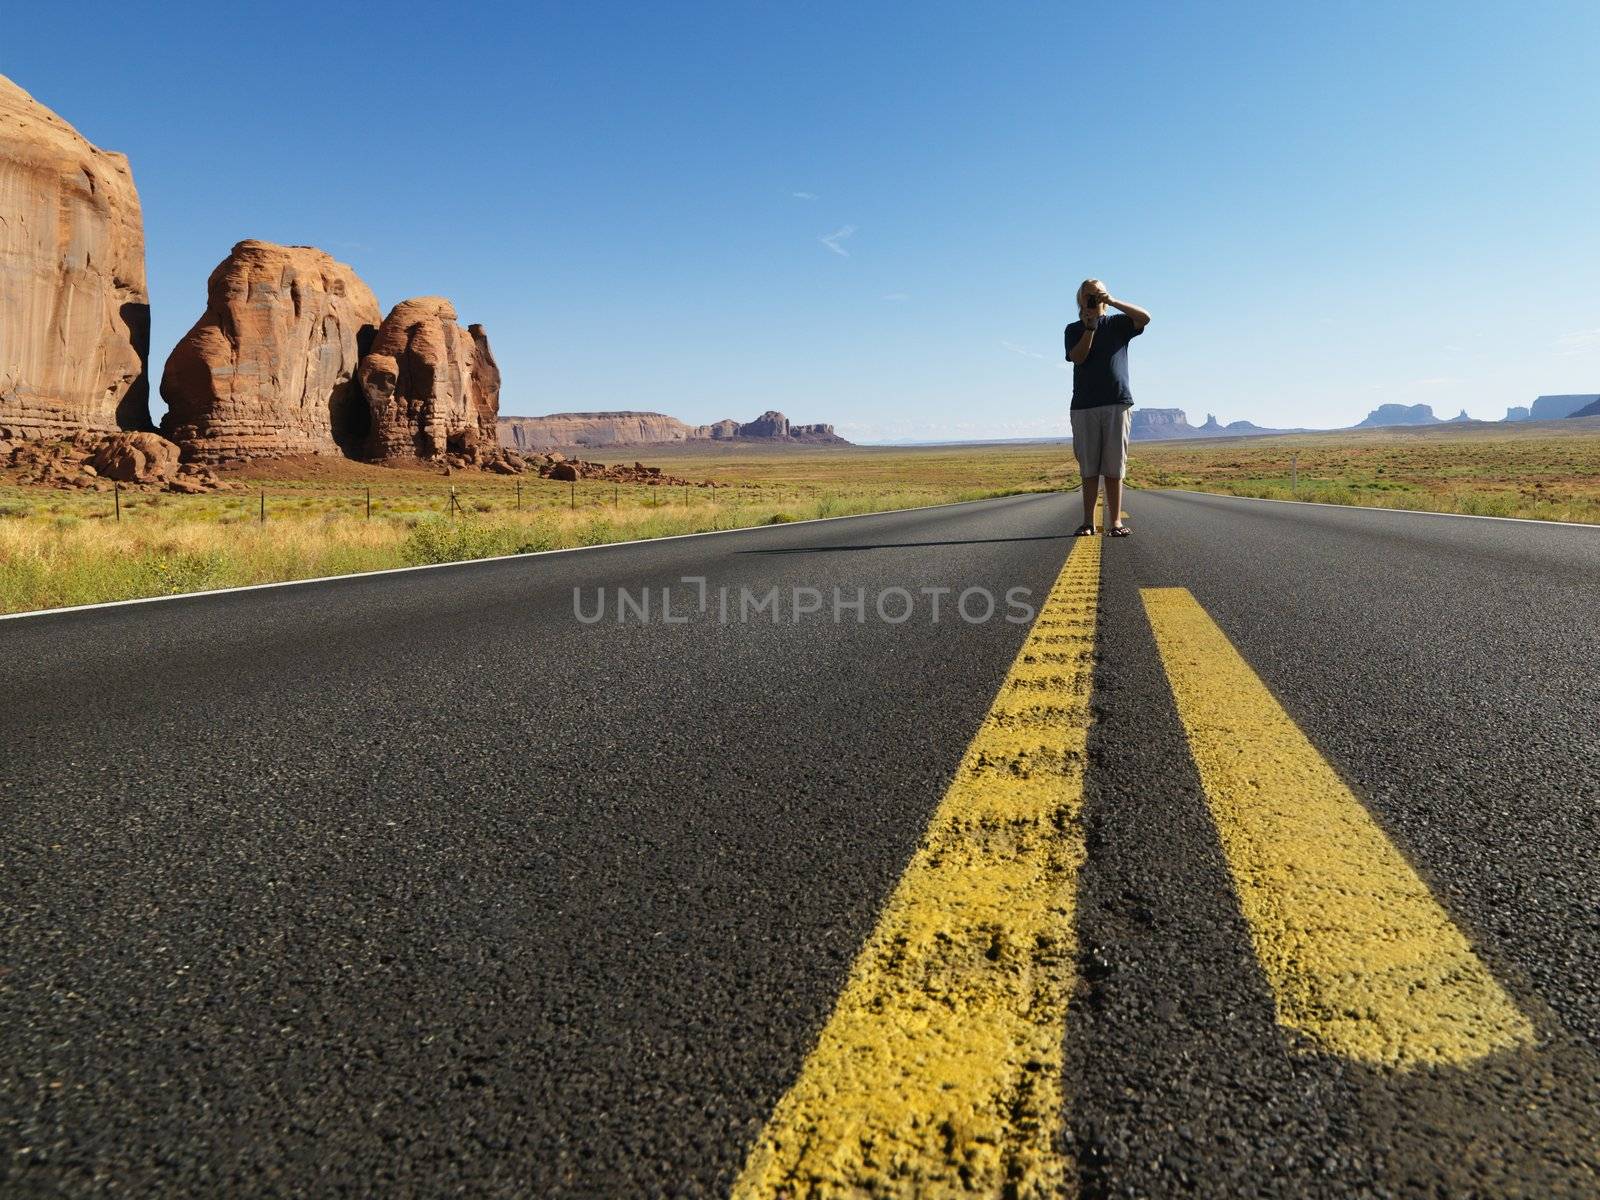 Caucasian teenage boy standing in open road in desert with landforms taking photograph.